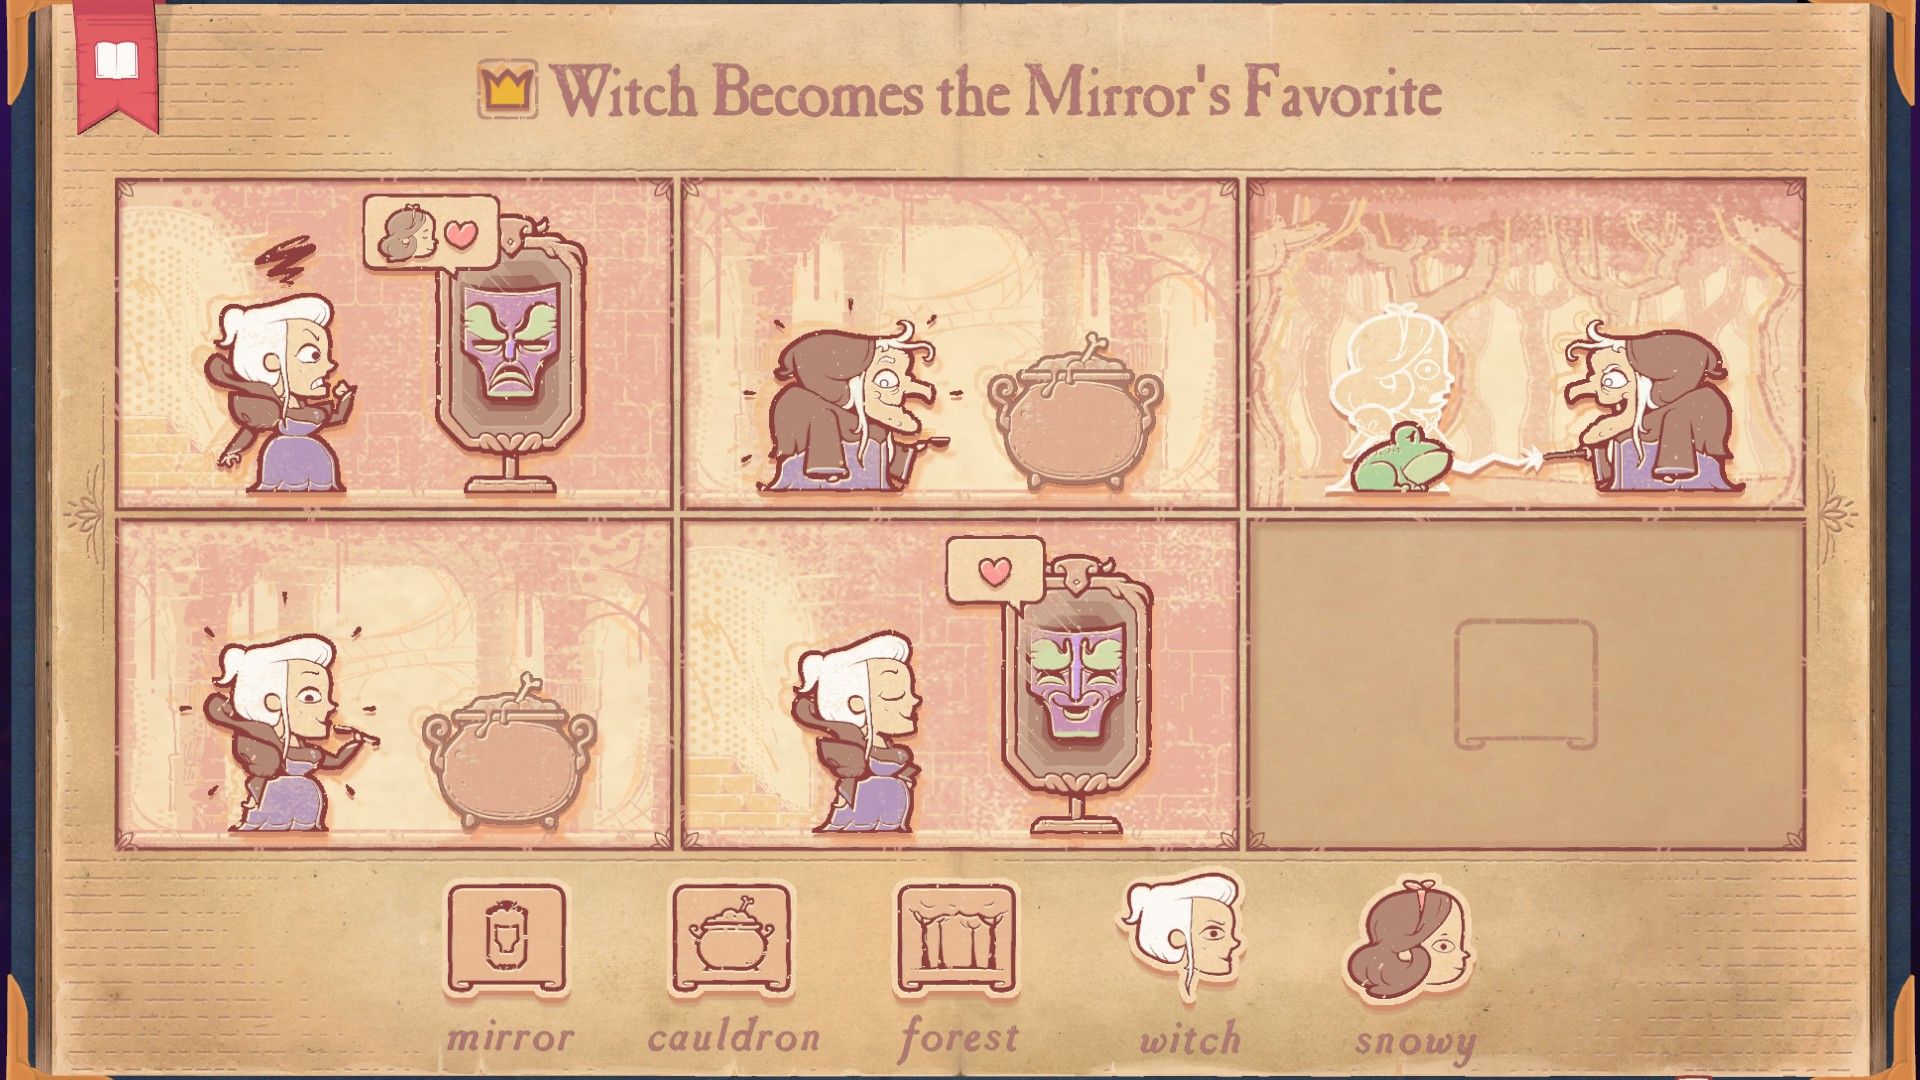 The solution for the Competitor section of Storyteller, showing the Witch becoming the mirror's favorite.